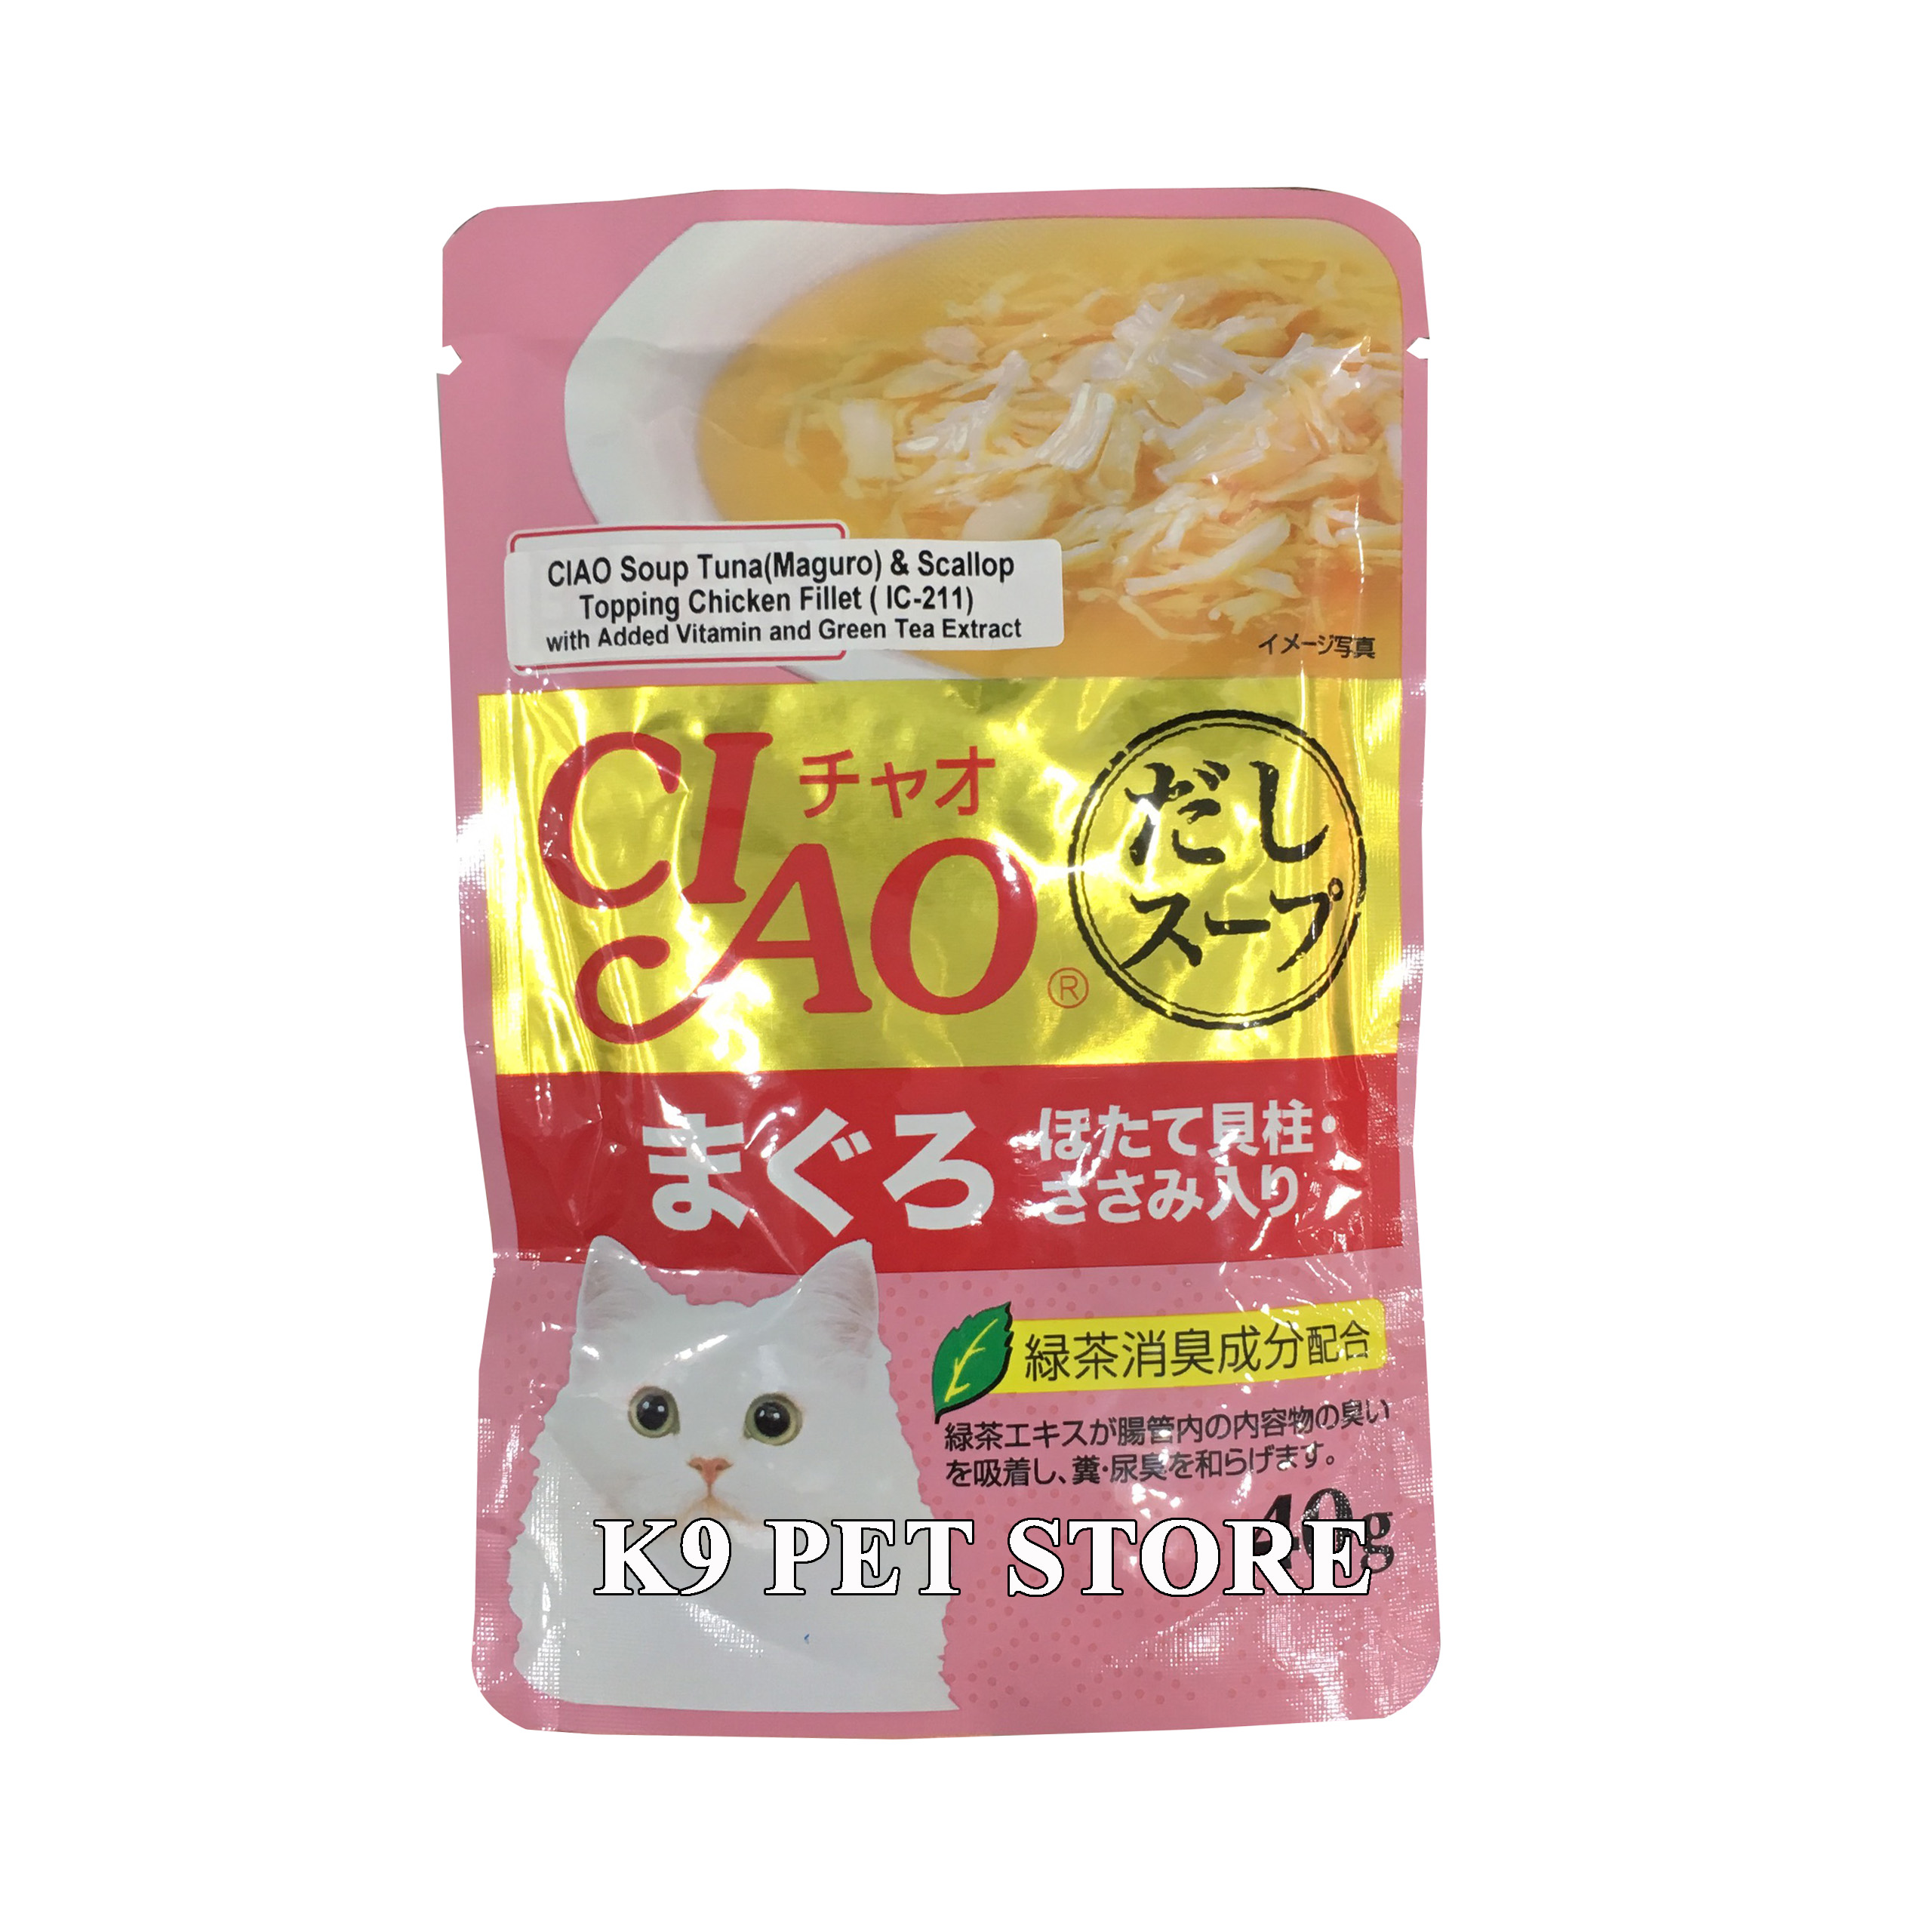 [IC-211] Pate Ciao cho mèo Soup Tuna (Maguro) & Scallop Topping Chicken Fillet 40g